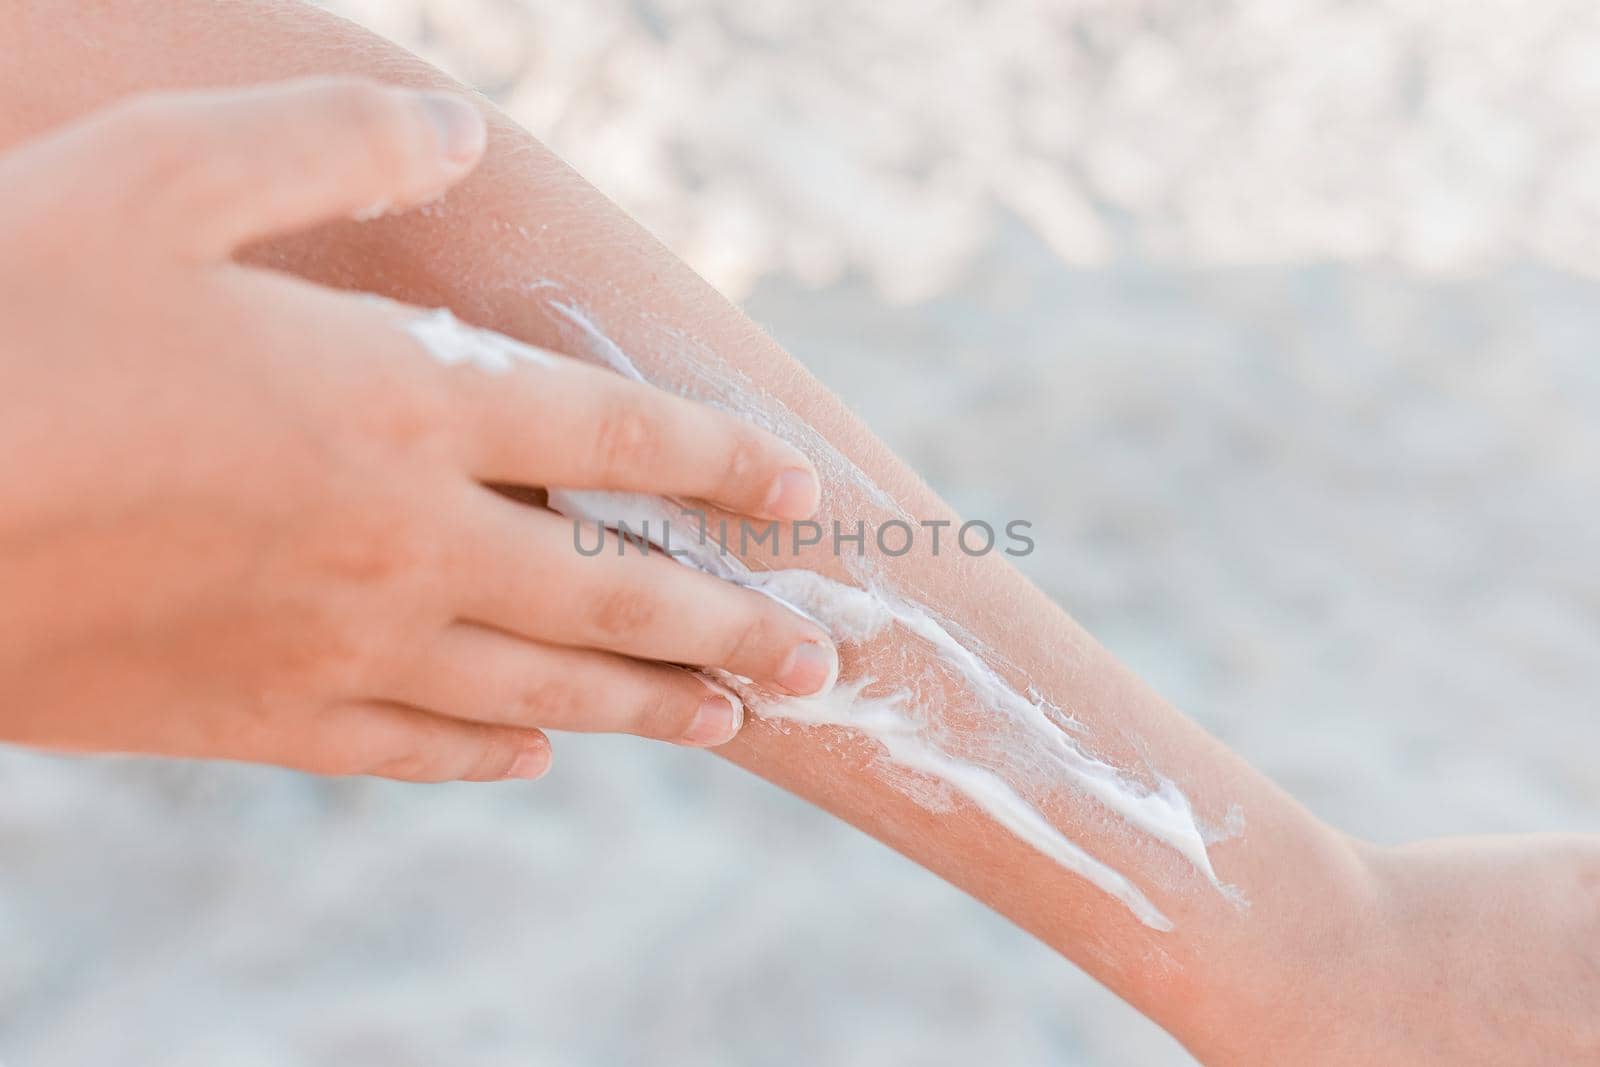 The hand of a young girl smears sunscreen and sun protection on the second hand against the background of the beach, close-up.